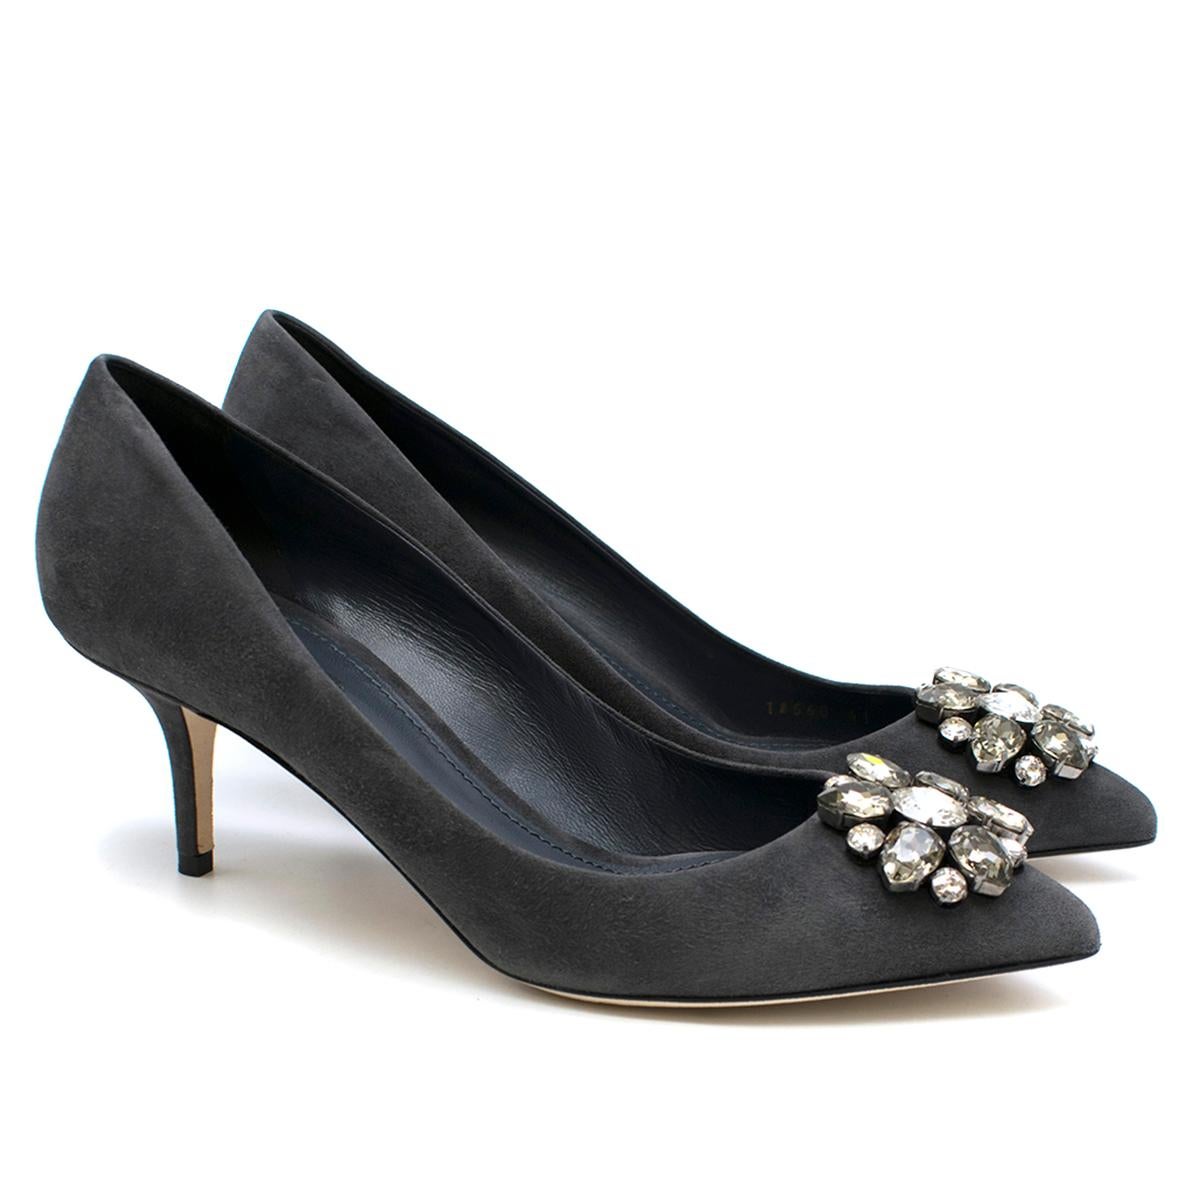 Dolce & Gabbana Grey Decollete Suede Brooch-detailed Pumps

- Grey, suede pumps
- Iconic crystal brooch embellishment in silver & light gold
- Point-toe
- Leather insole with branded label
- Smooth sole with logo detail
- Low stiletto heel
- 100%